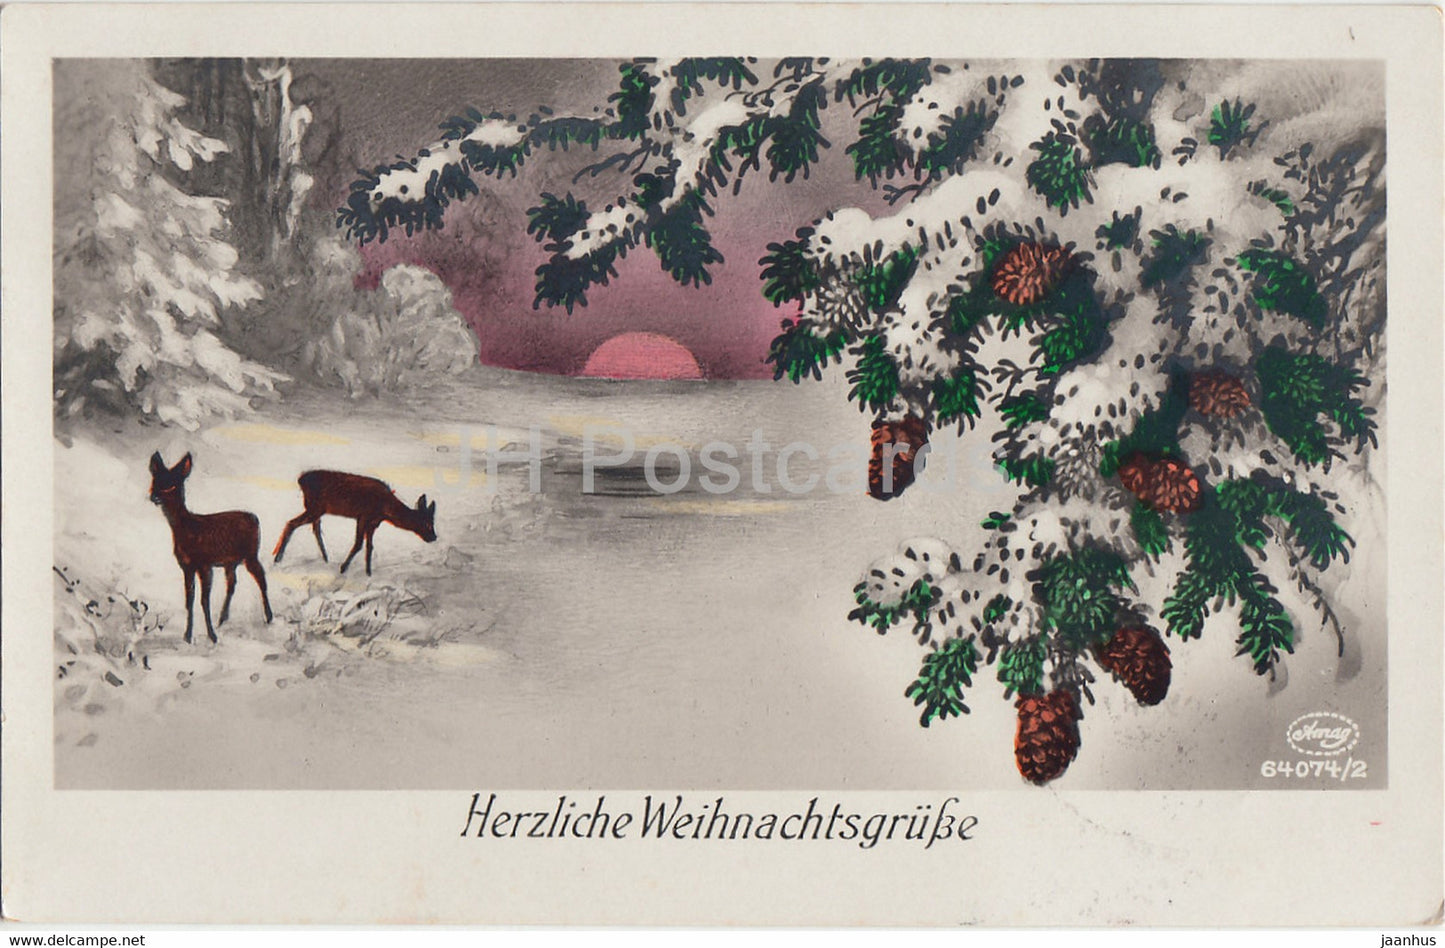 Christmas Greeting Card - Herzliche Weihnachtsgrusse - winter - deer - Amag 64074/2 - old postcard - 1929 Germany - used - JH Postcards